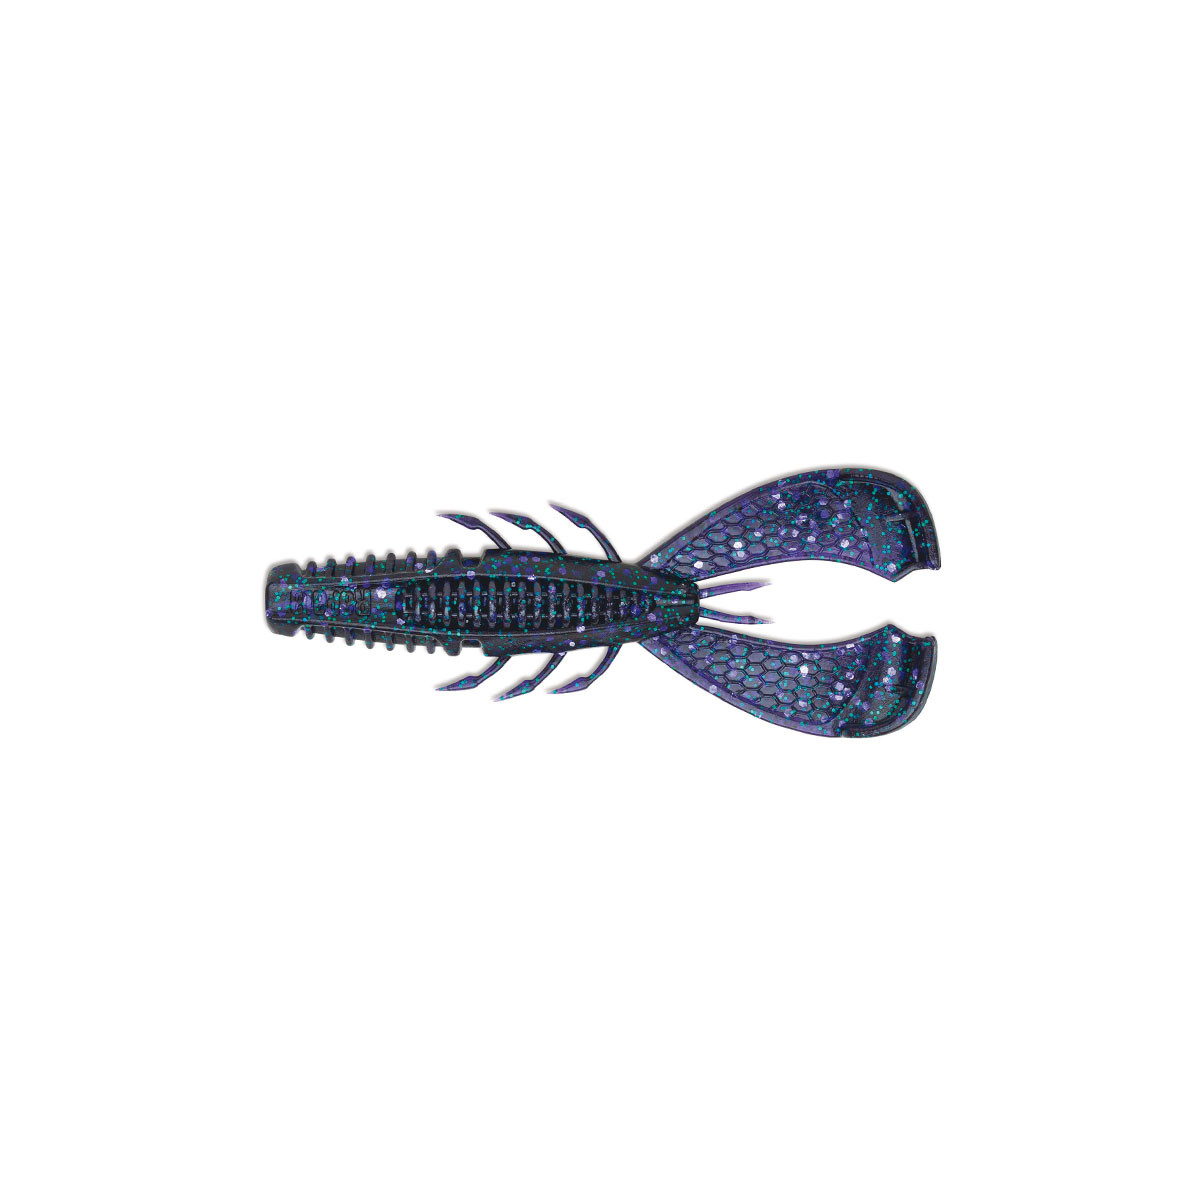 RAPALA CRUSHCITY CLEANUP CRAW